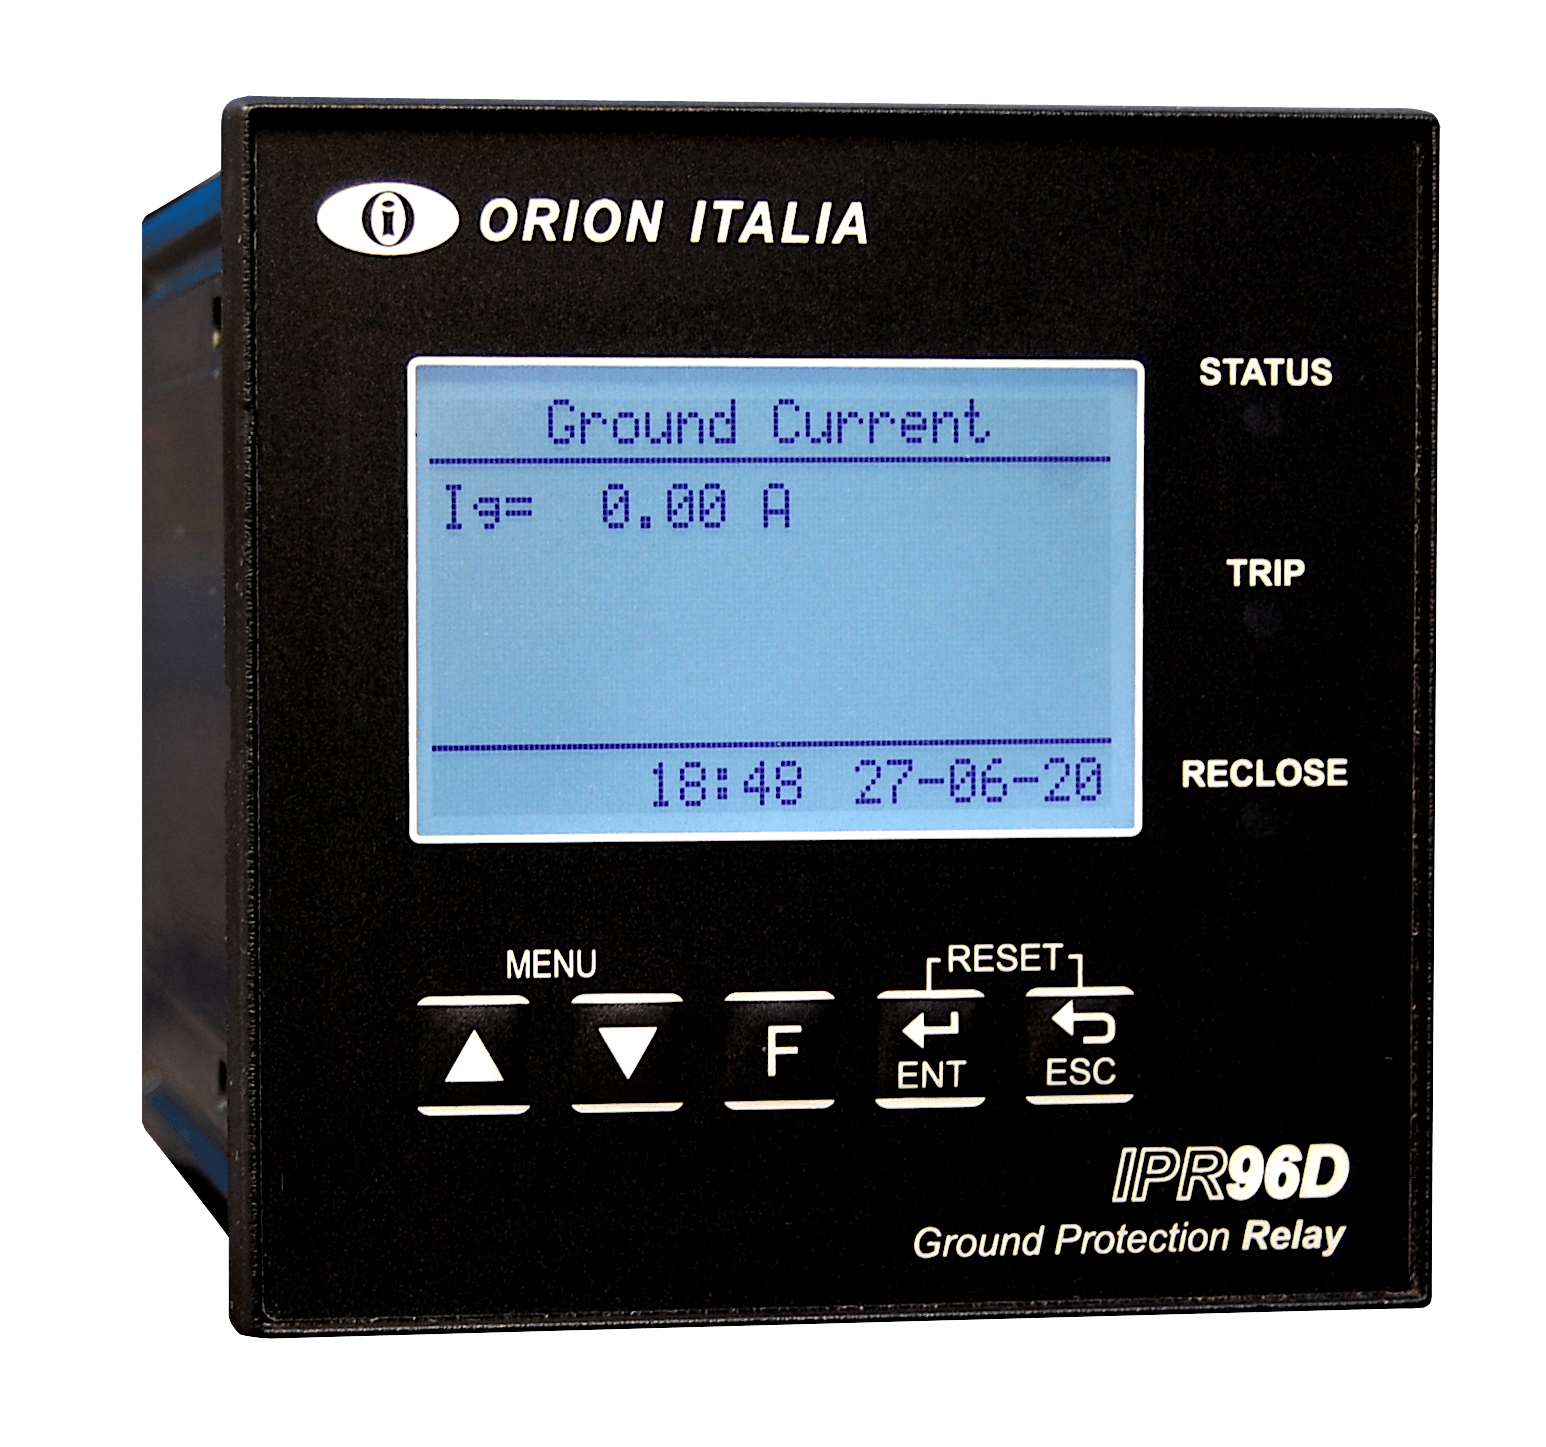 Ground Protection Relay - IPR96D - Orion Italia